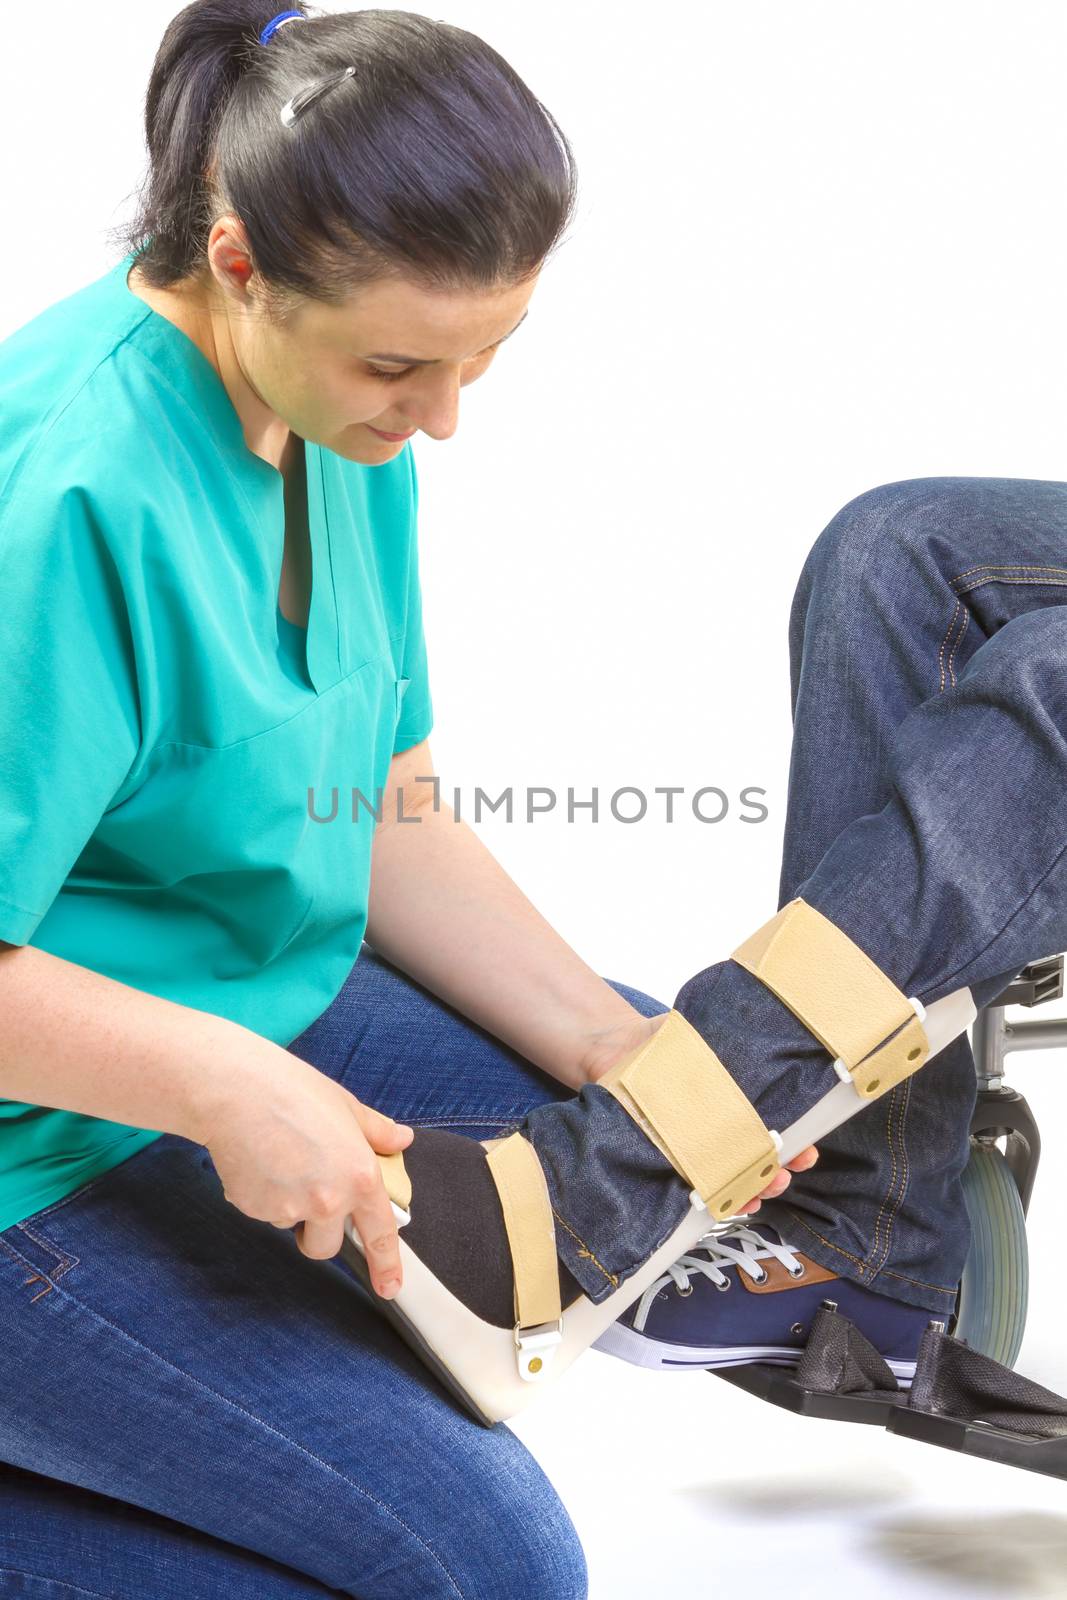 Orthopedic equipment for young man in wheelchair by manaemedia